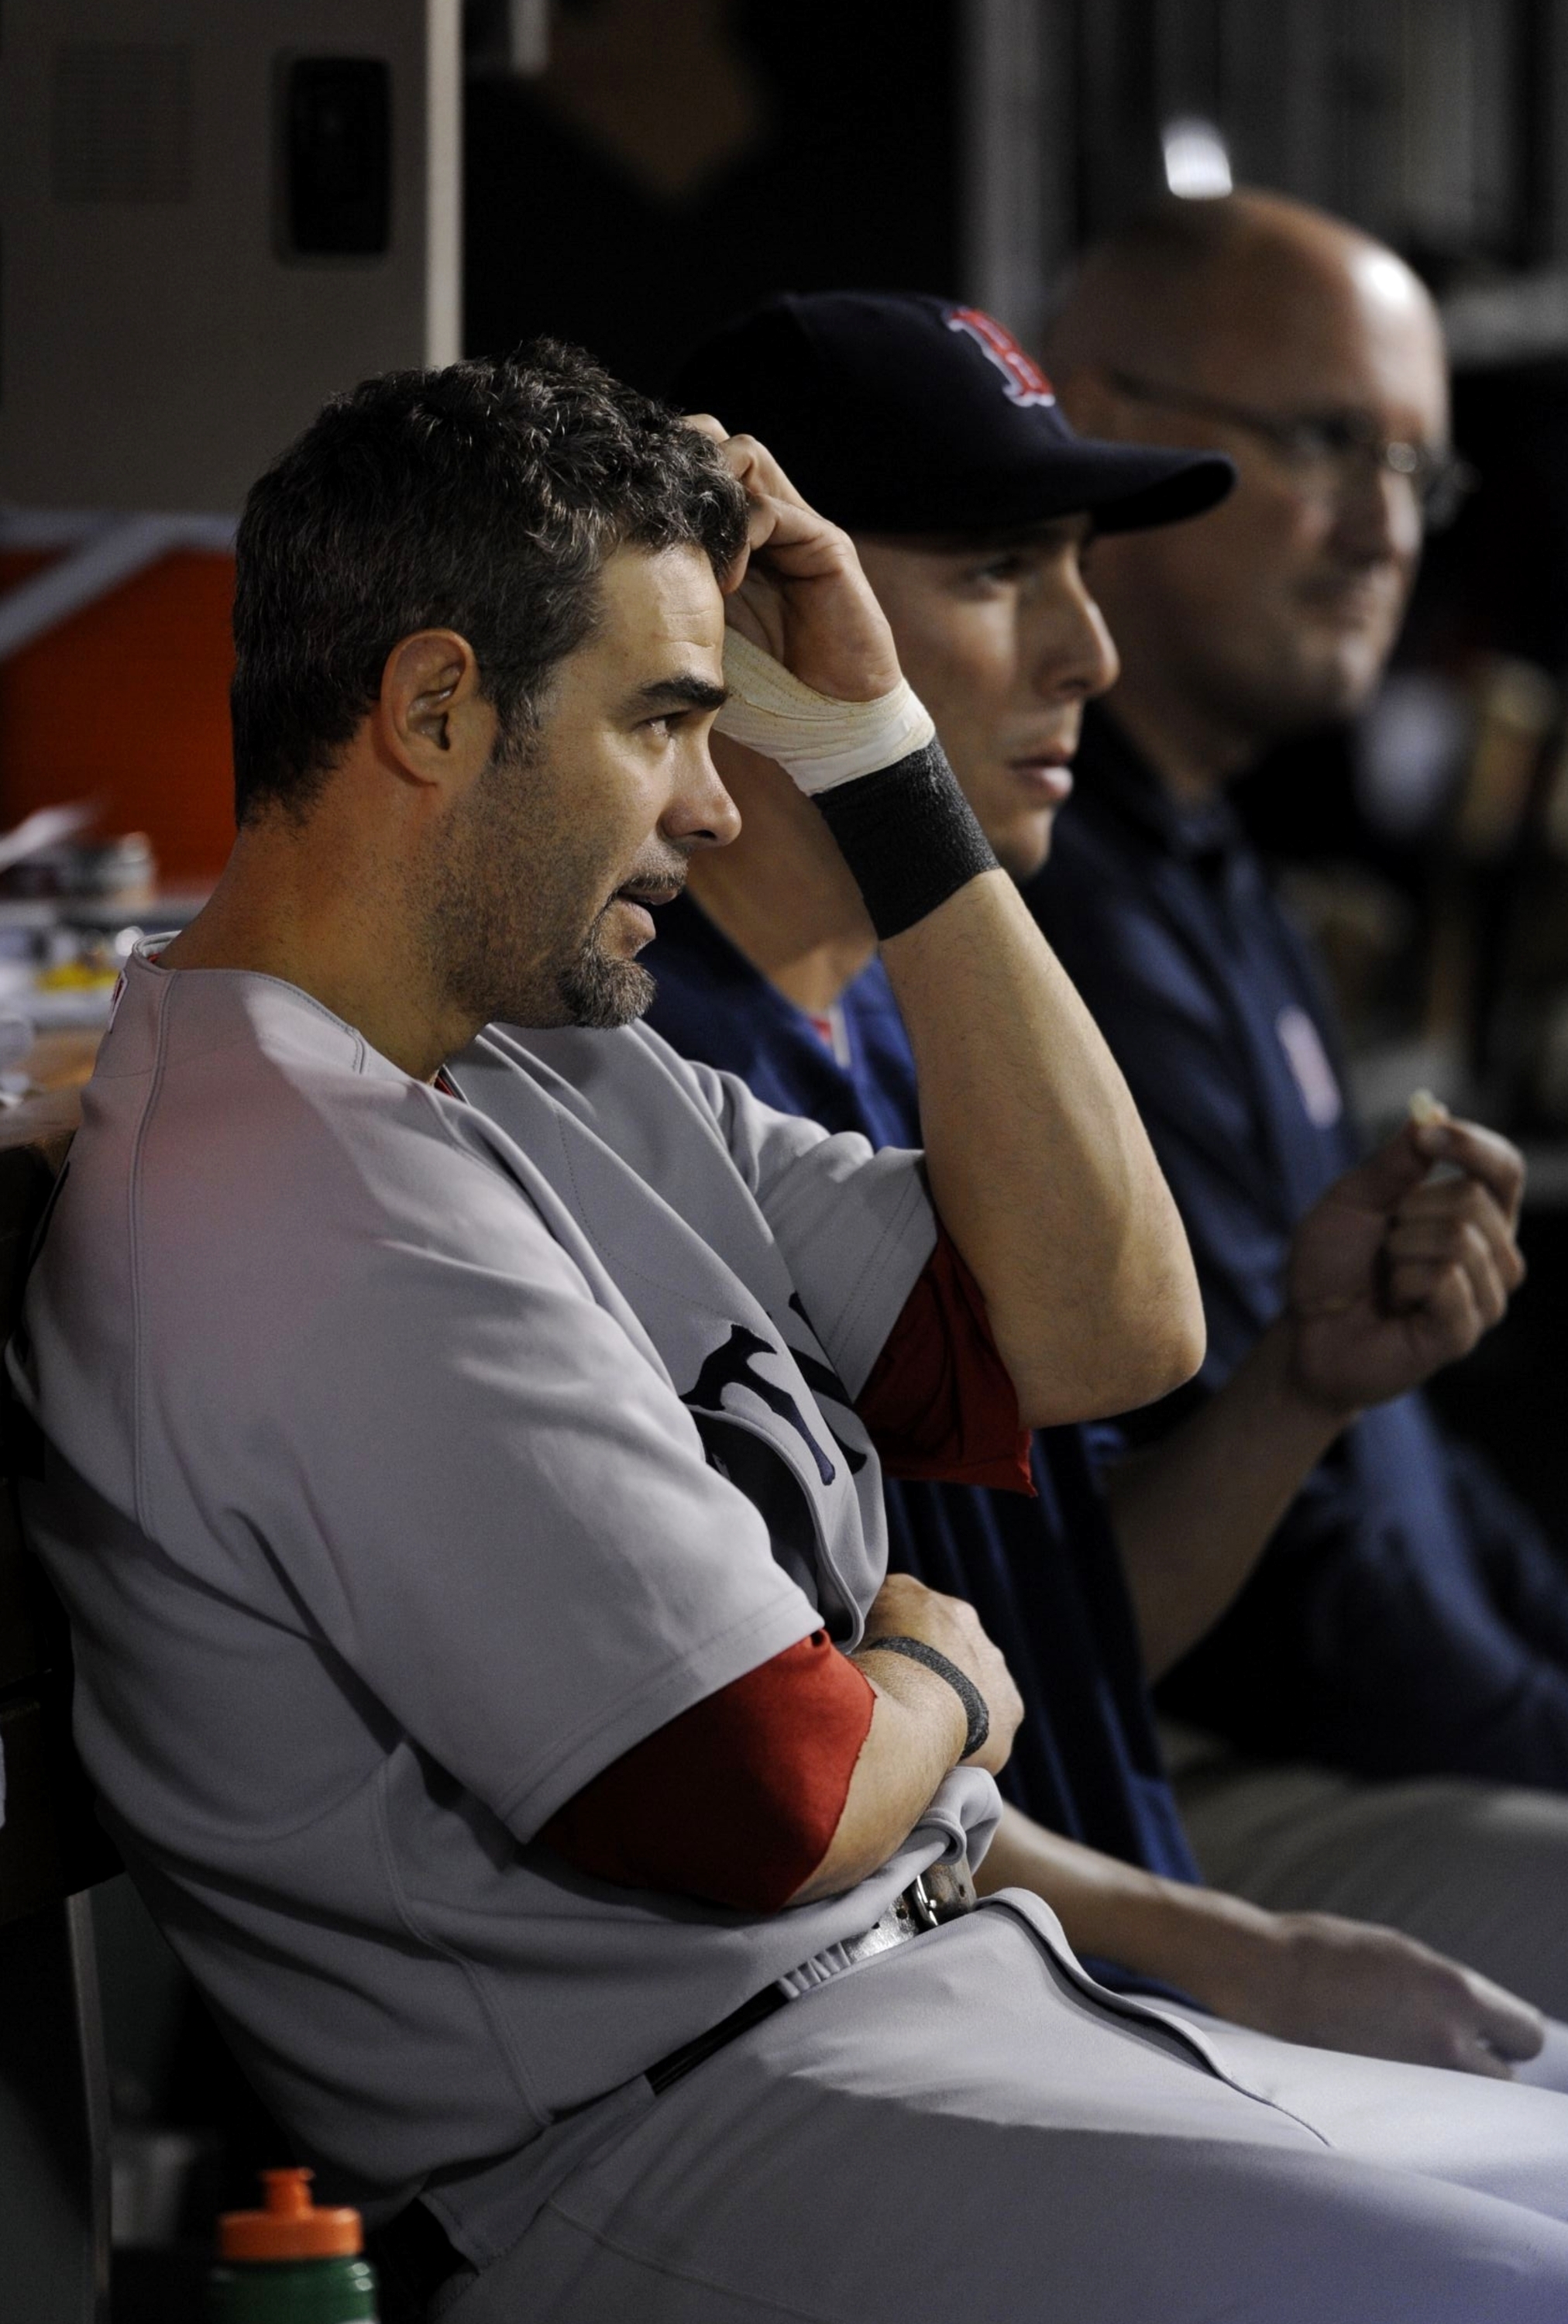 ANAHEIM, CA - OCTOBER 09:  Mike Lowell #25 of the Boston Red Sox watches the game from the dugout during the ALDS in the 2009 MLB Playoffs against the Los Angeles Angels of Anaheim at Angel Stadium on October 9, 2009 in Anaheim, California. (Photo by Kevo